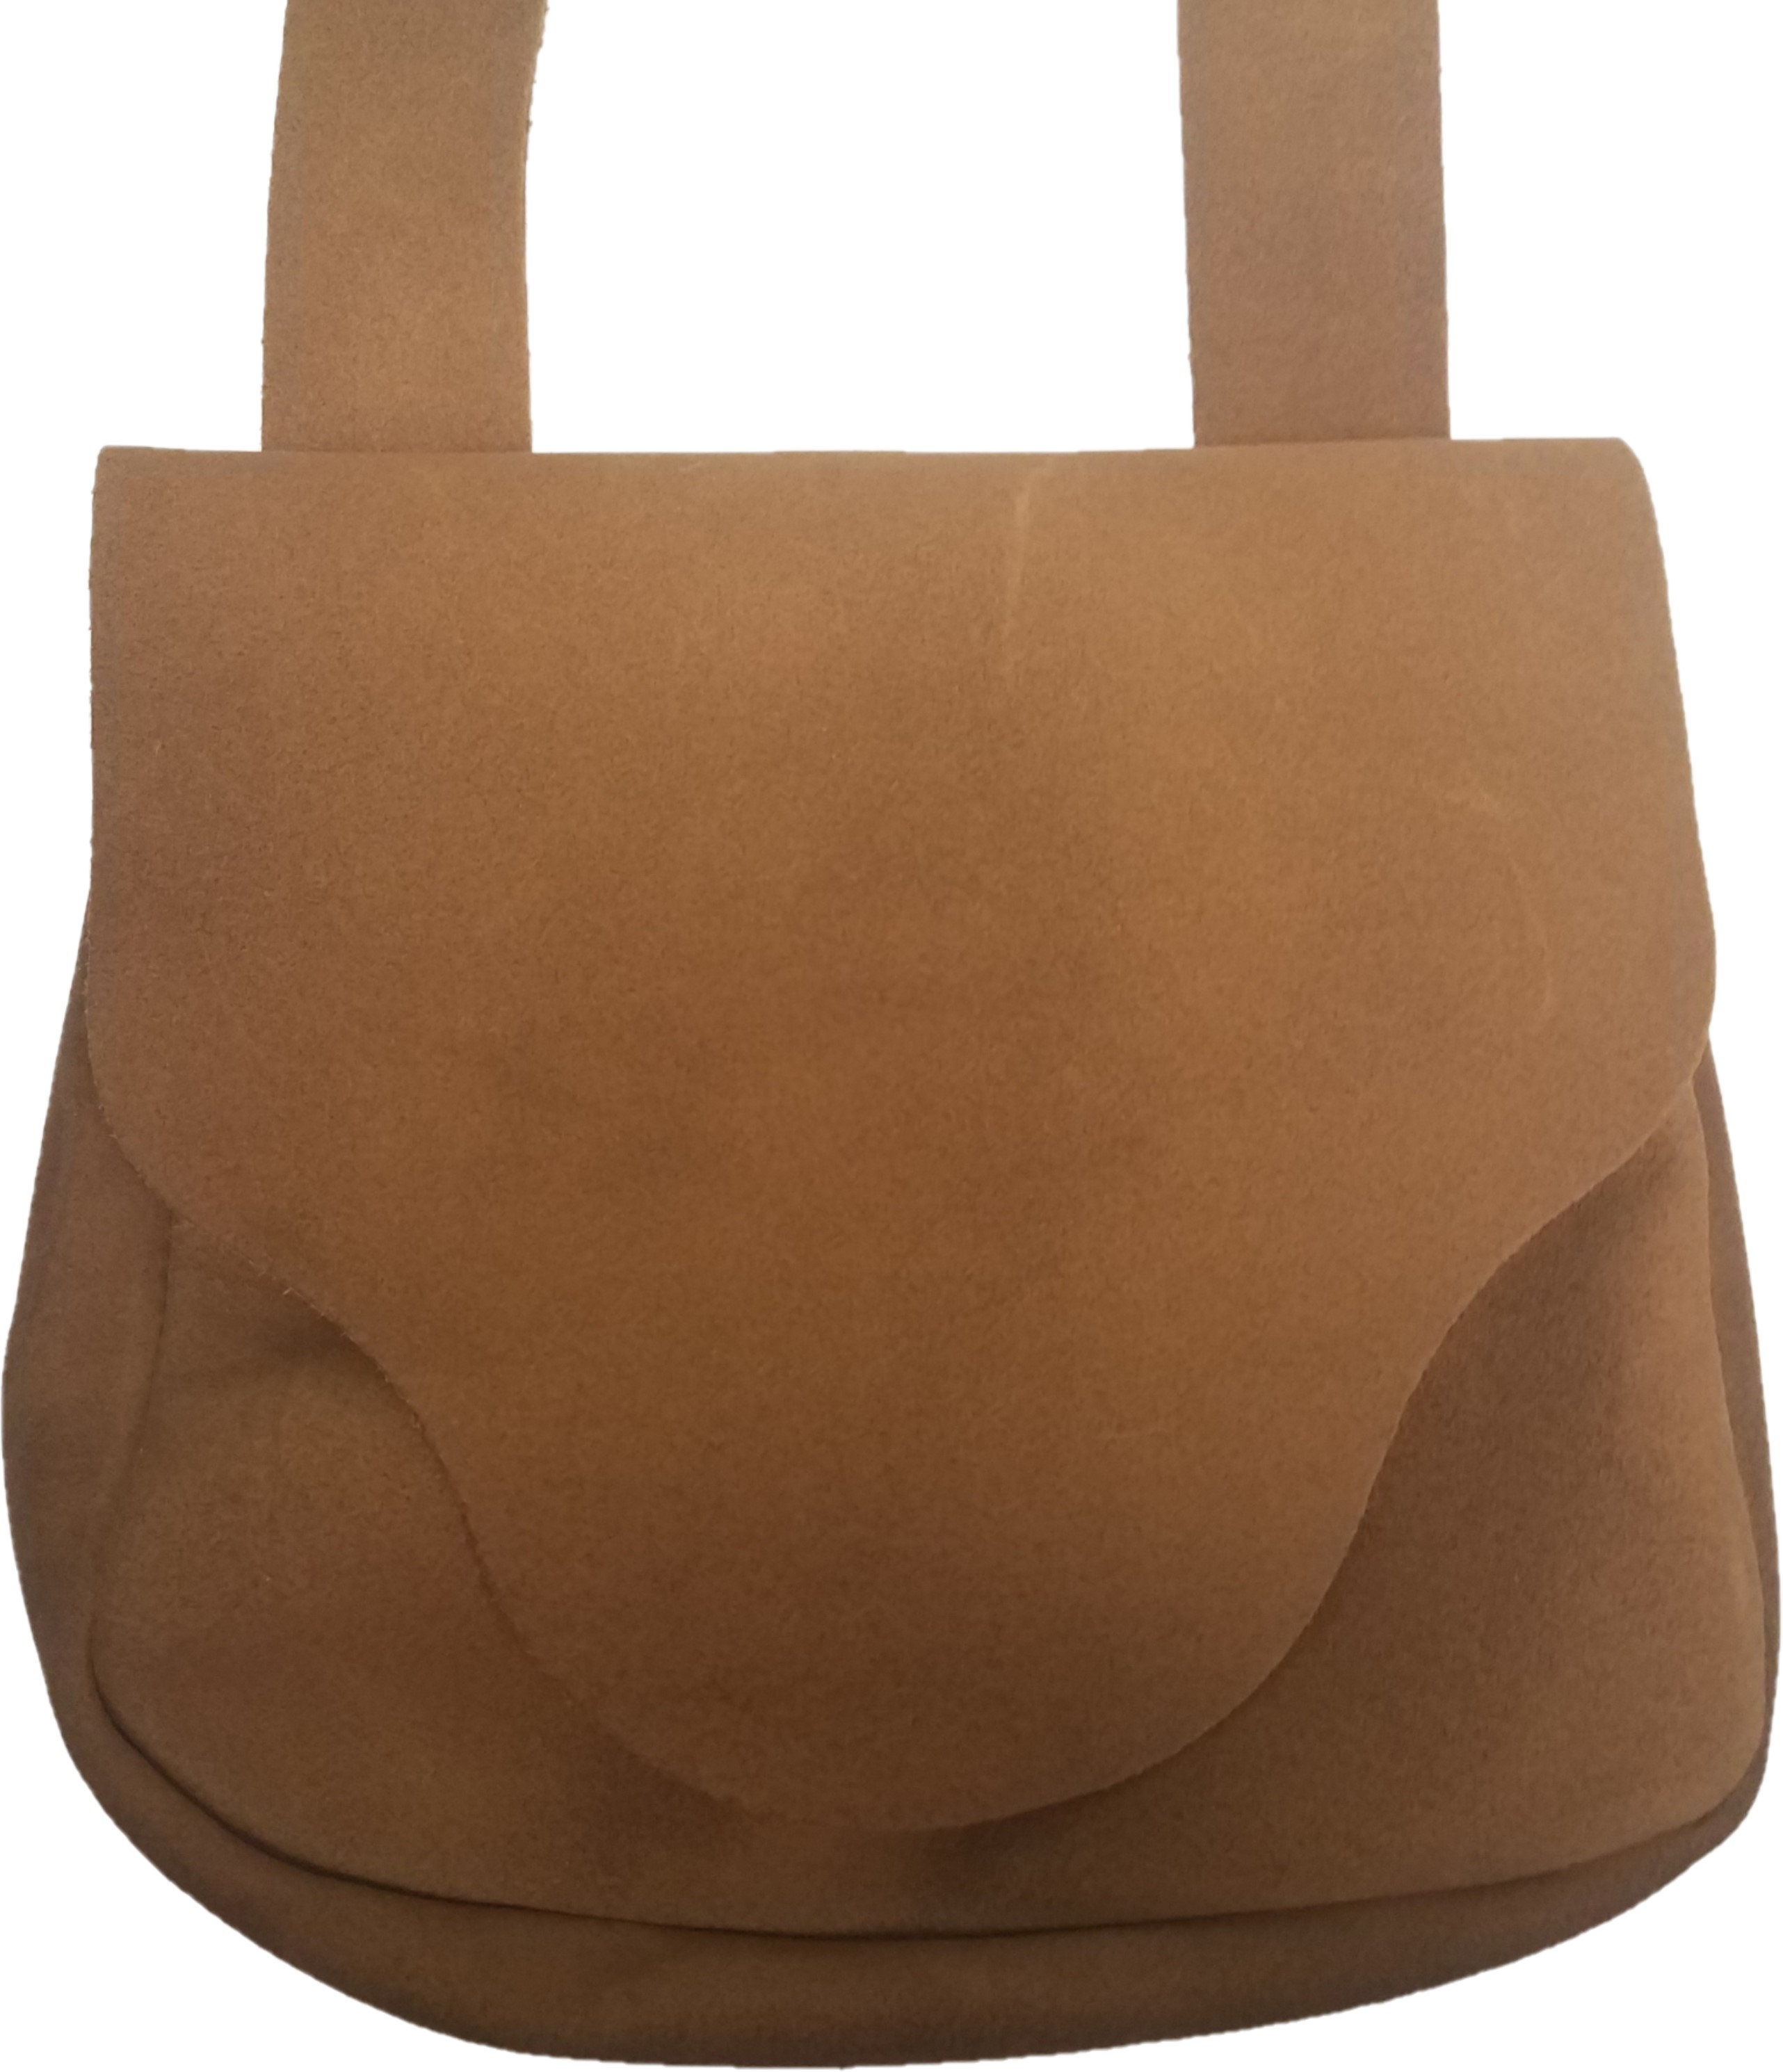 TRADITIONAL STYLE SUEDE LEATHER POSSIBLES BAG